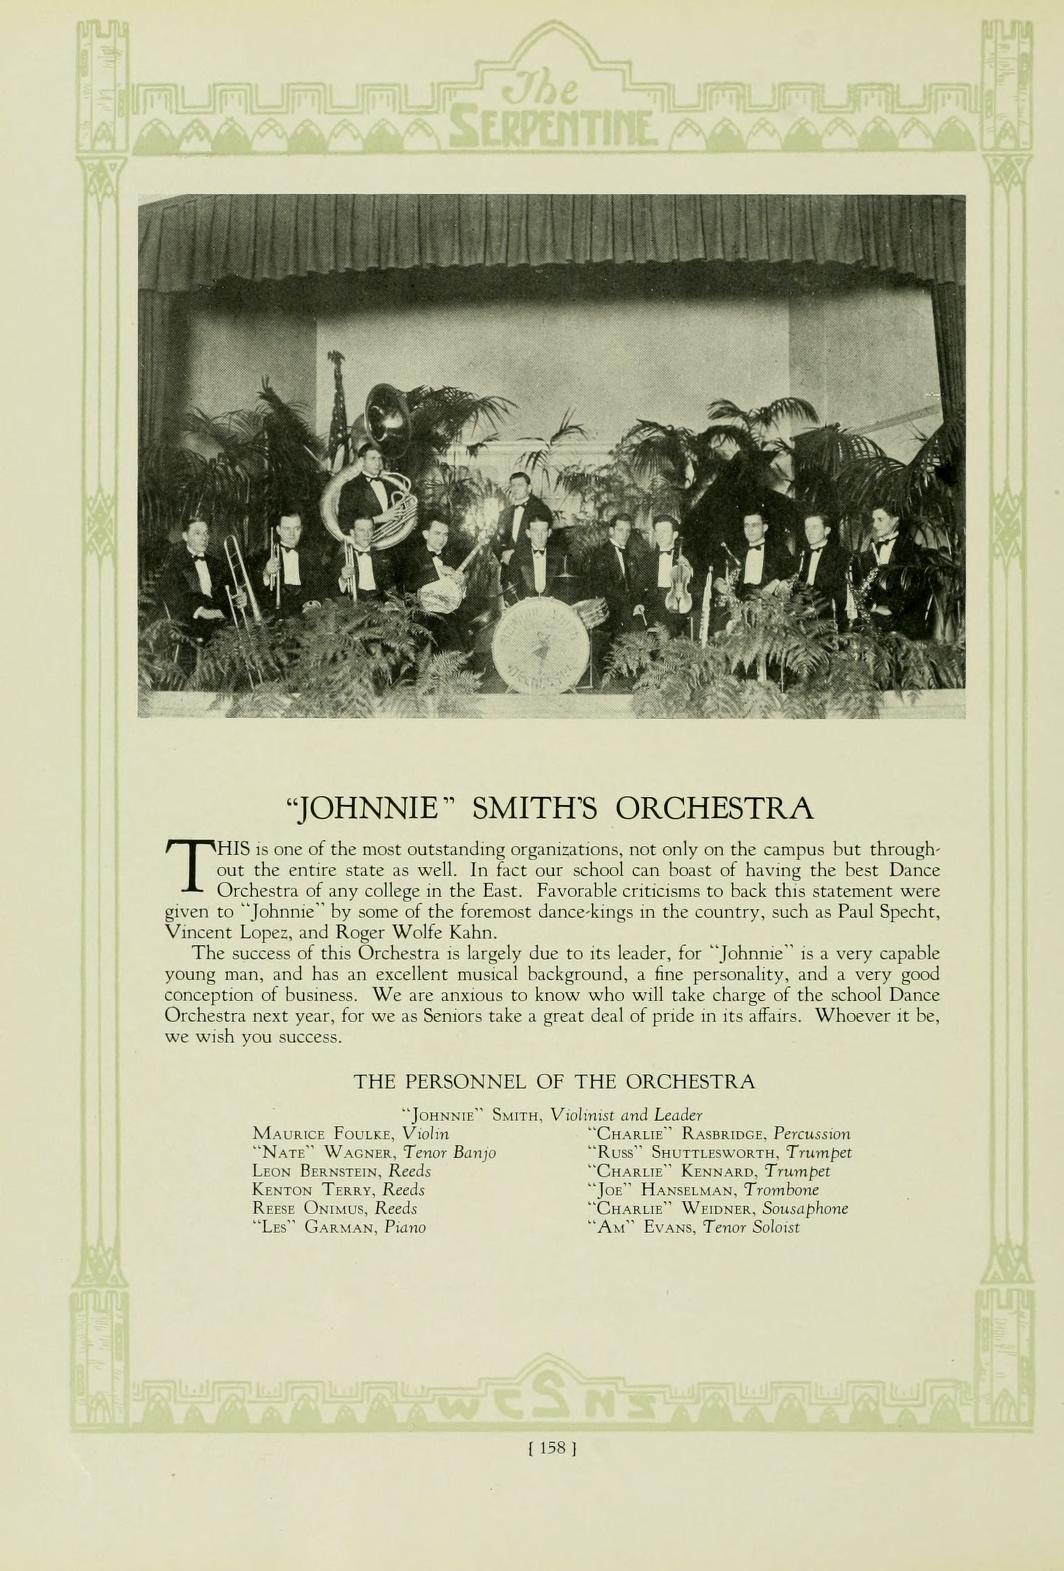   The SERPENTINE T "JOHNNIE" SMITH'S ORCHESTRA HIS is one of the most outstanding organizations, not only on the campus but through- out the entire state as well. In fact our school can boast of having the best Dance Orchestra of any college in the East. Favorable criticisms to back this statement were given to "Johnnie" by some of the foremost dance-kings in the country, such as Paul Specht, Vincent Lopez, and Roger Wolfe Kahn, The success of this Orchestra is largely due to its leader, for "Johnne" is a very capable young man, and has an excellent musical background, a fine personality, and a very good. conception of business. We are anxious to know who will take charge of the school Dance Orchestra next year, for we as Seniors take a great deal of pride in its affairs. Whoever it be, we wish you success. THE PERSONNEL OF THE ORCHESTRA "Jon" Sam. Vilnis and Leader MAURICE FOULEY, V NATE WAGS, Tenor Bang LEON BERNSTEIN, Reeds KENTON TERRY, Reeds Rena ONU, Reeds Lo" GARMAN, Pans CHARLIE RAMBRIDGE, Peru "RU" SHUTTLEWORTH, Trumpet "CHARLIE KENNARD, Trumpet "Jo HANSELMAN, Trombone "CHARLIE WEIDS, Saphone "A" EVANS, Tenor Solit [158]